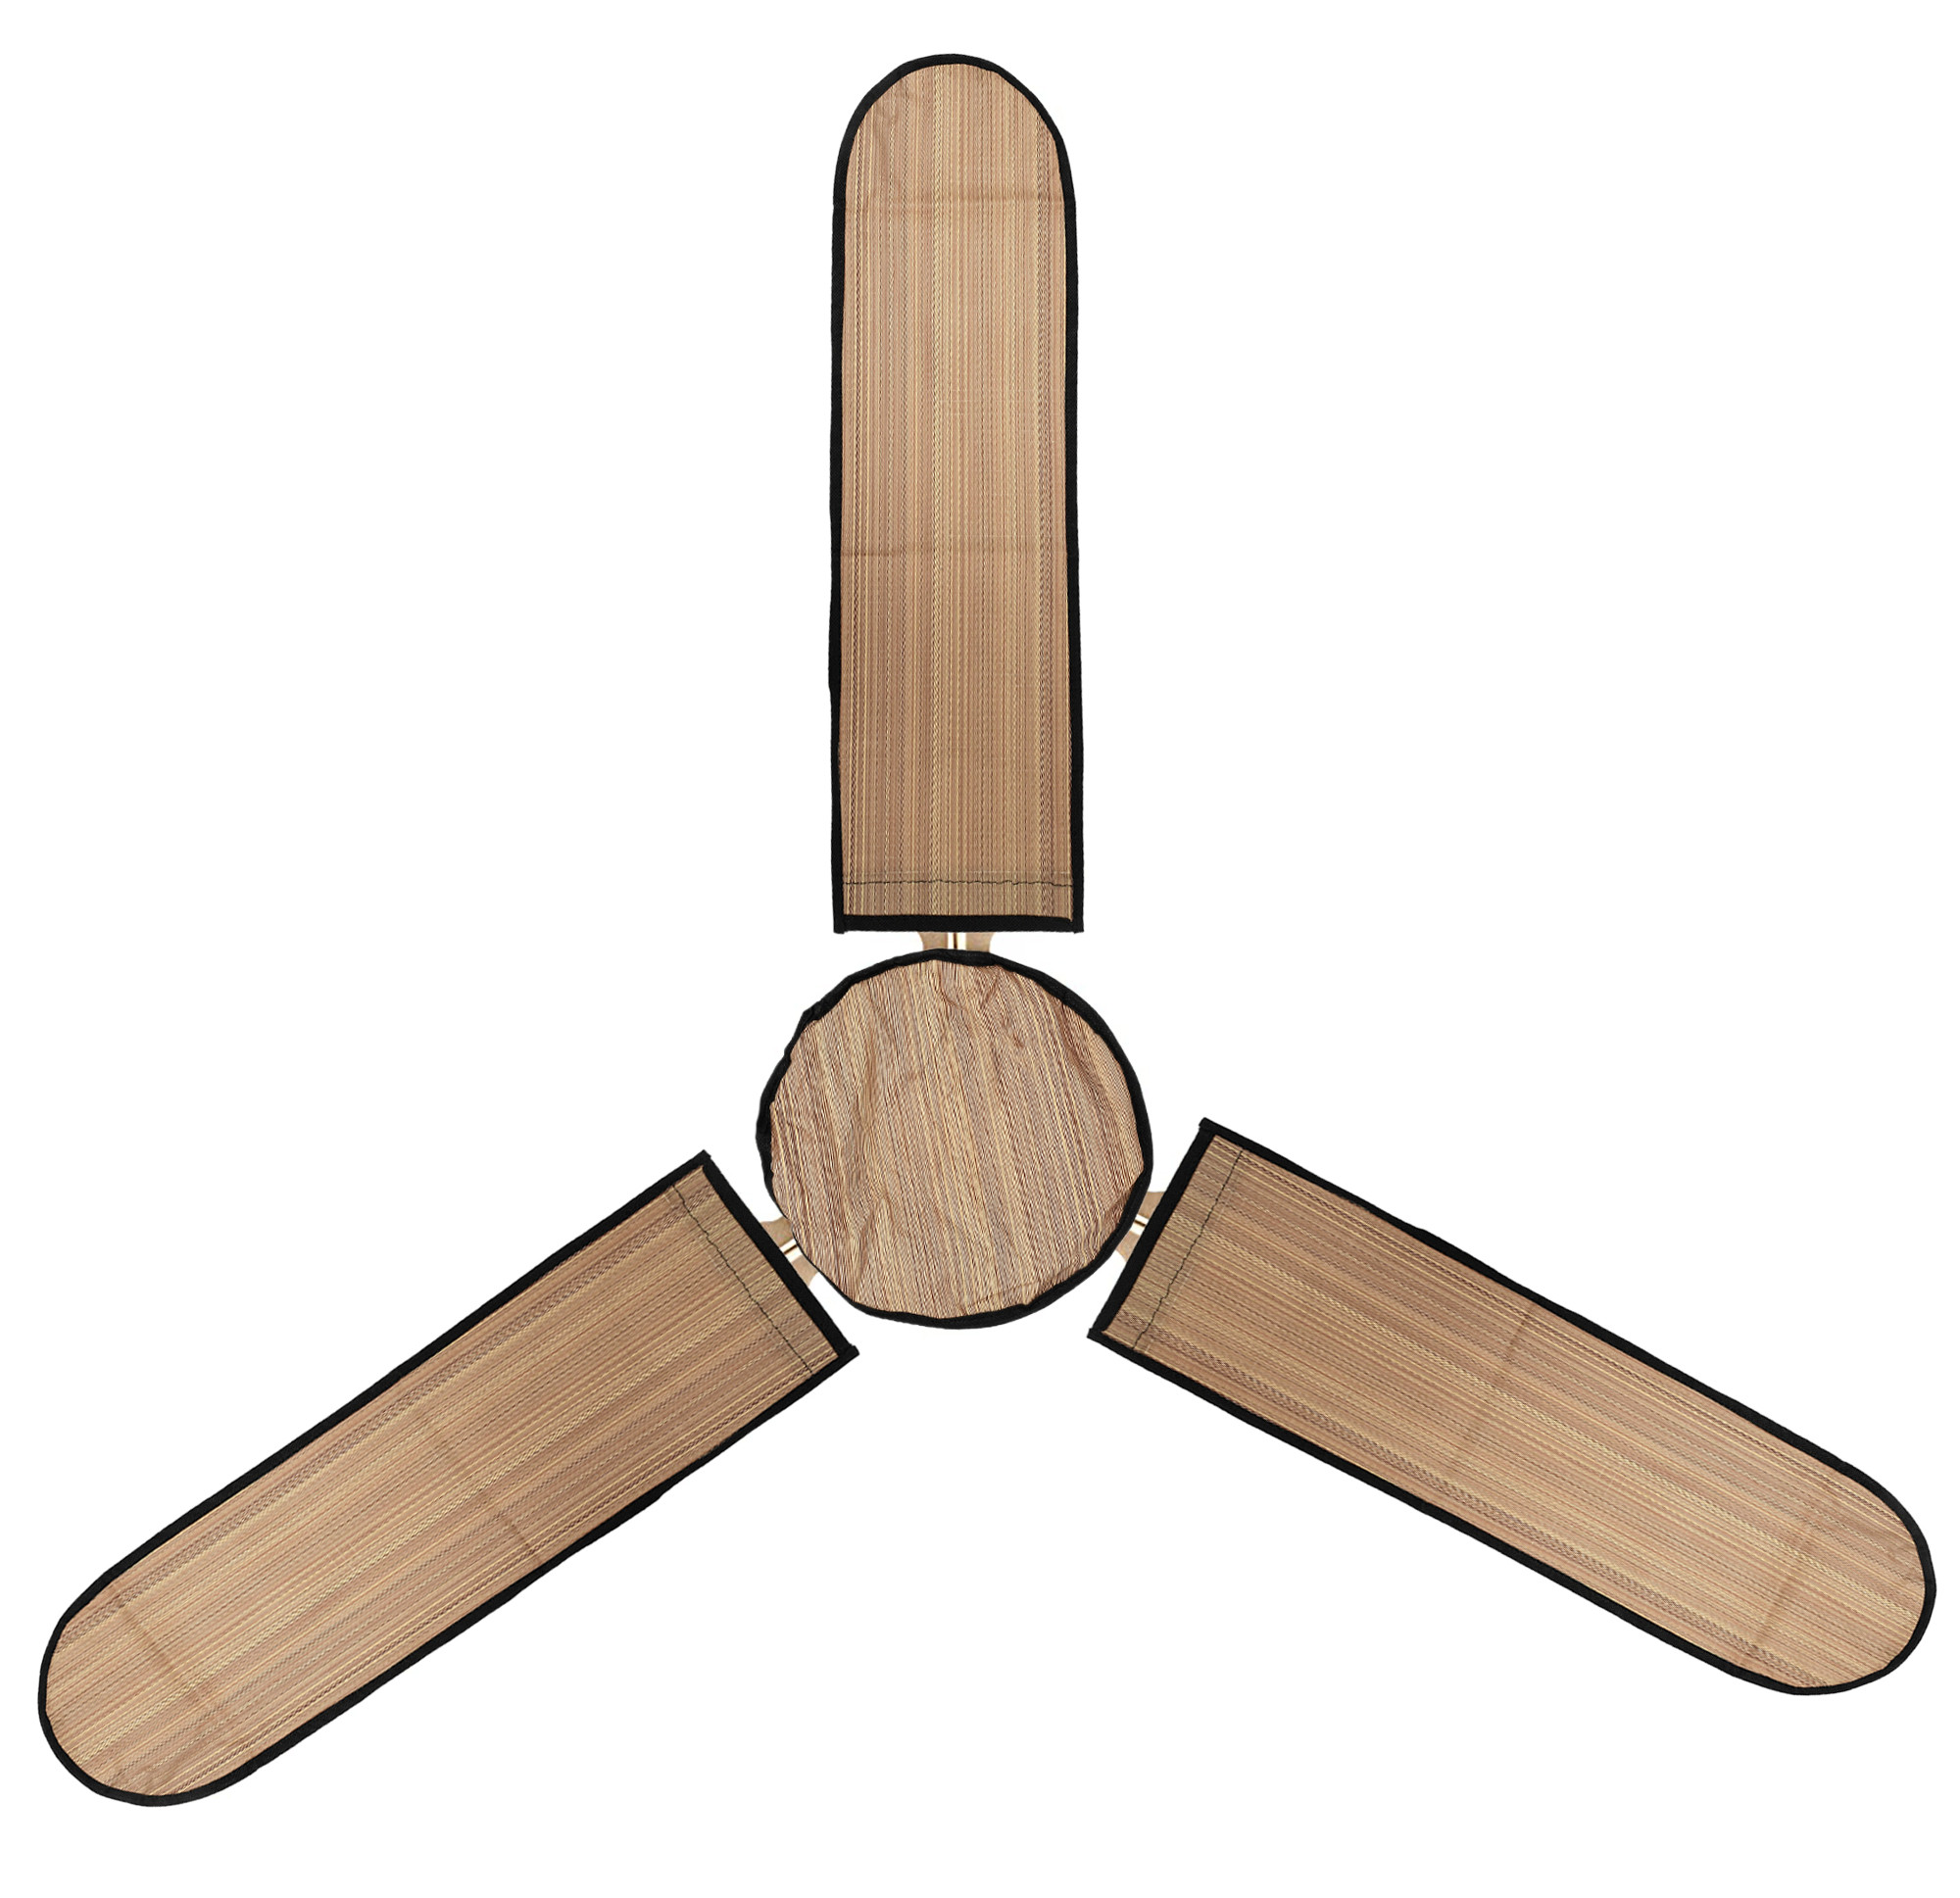 Kuber Industries PVC Wooden Design Dust Proof Three Blade Ceiling Fan Cover (Light Brown) 54KM4011